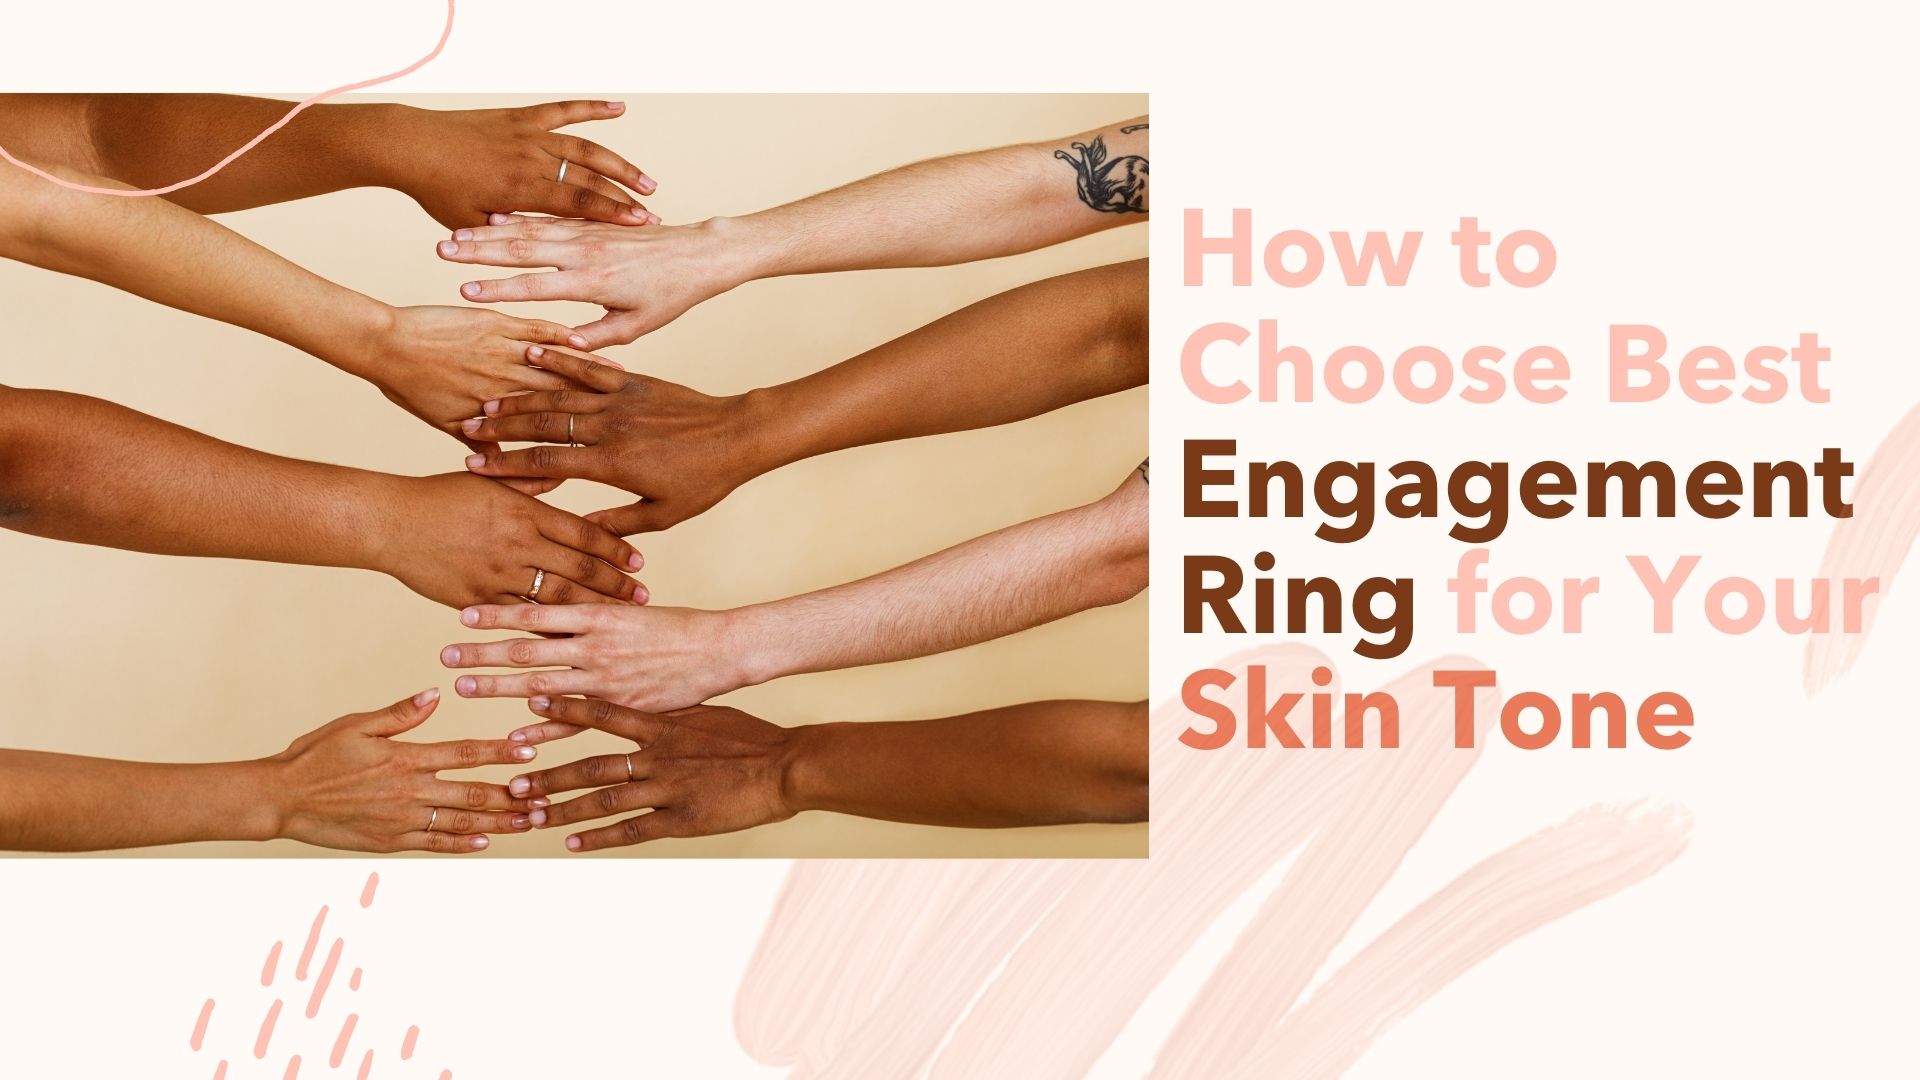 How to Choose the Best Engagement Ring